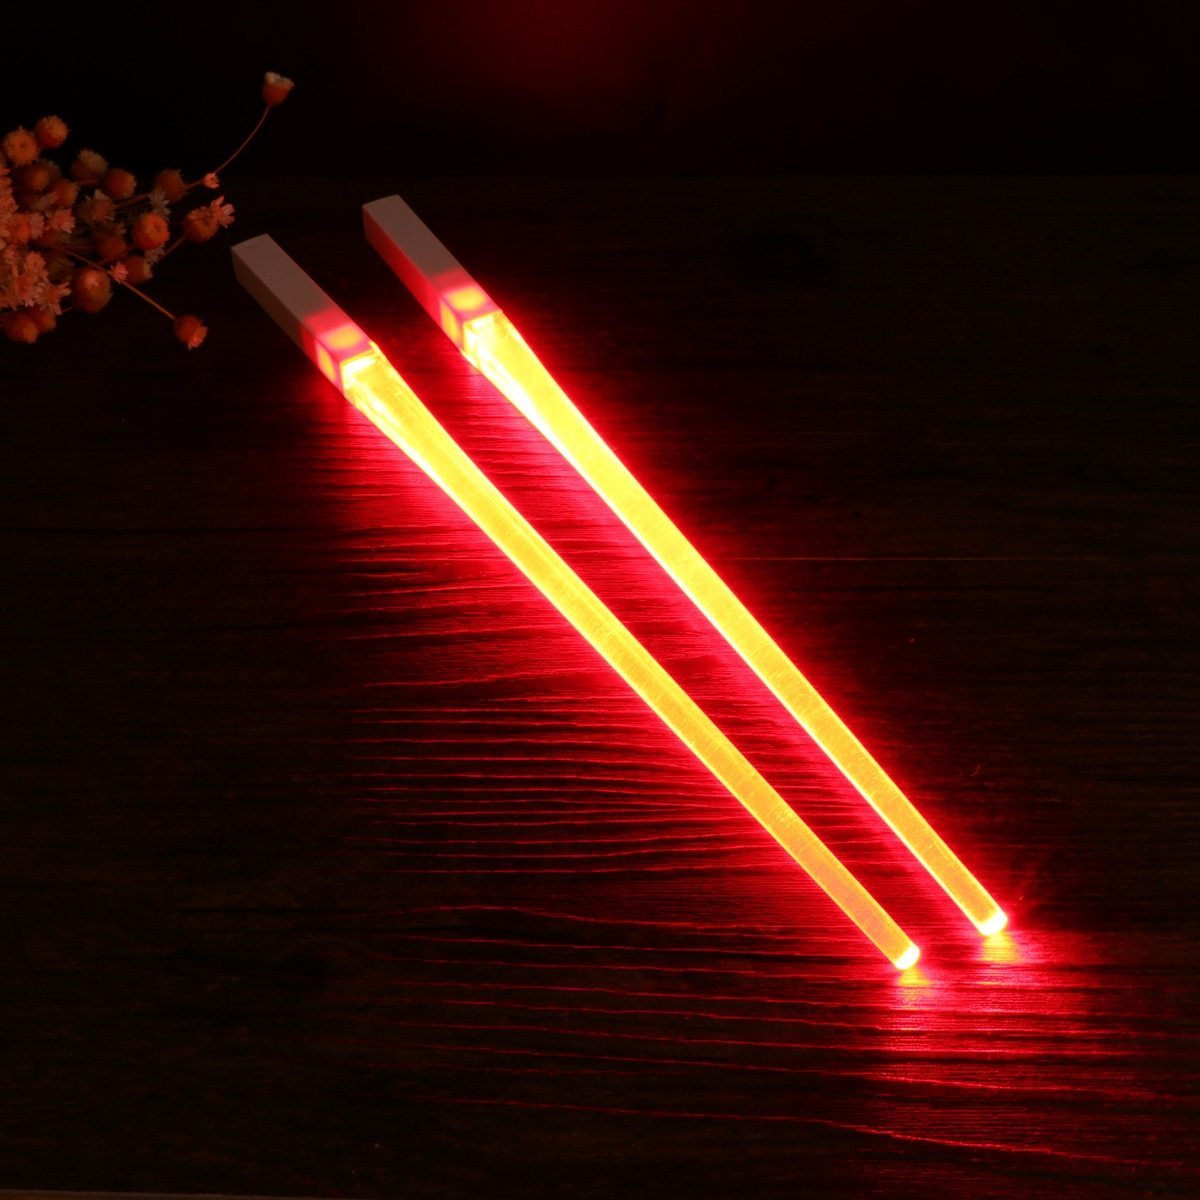 LED Lightsaber Chopsticks with Durable Portable BPA Free and Food Safe Tableware